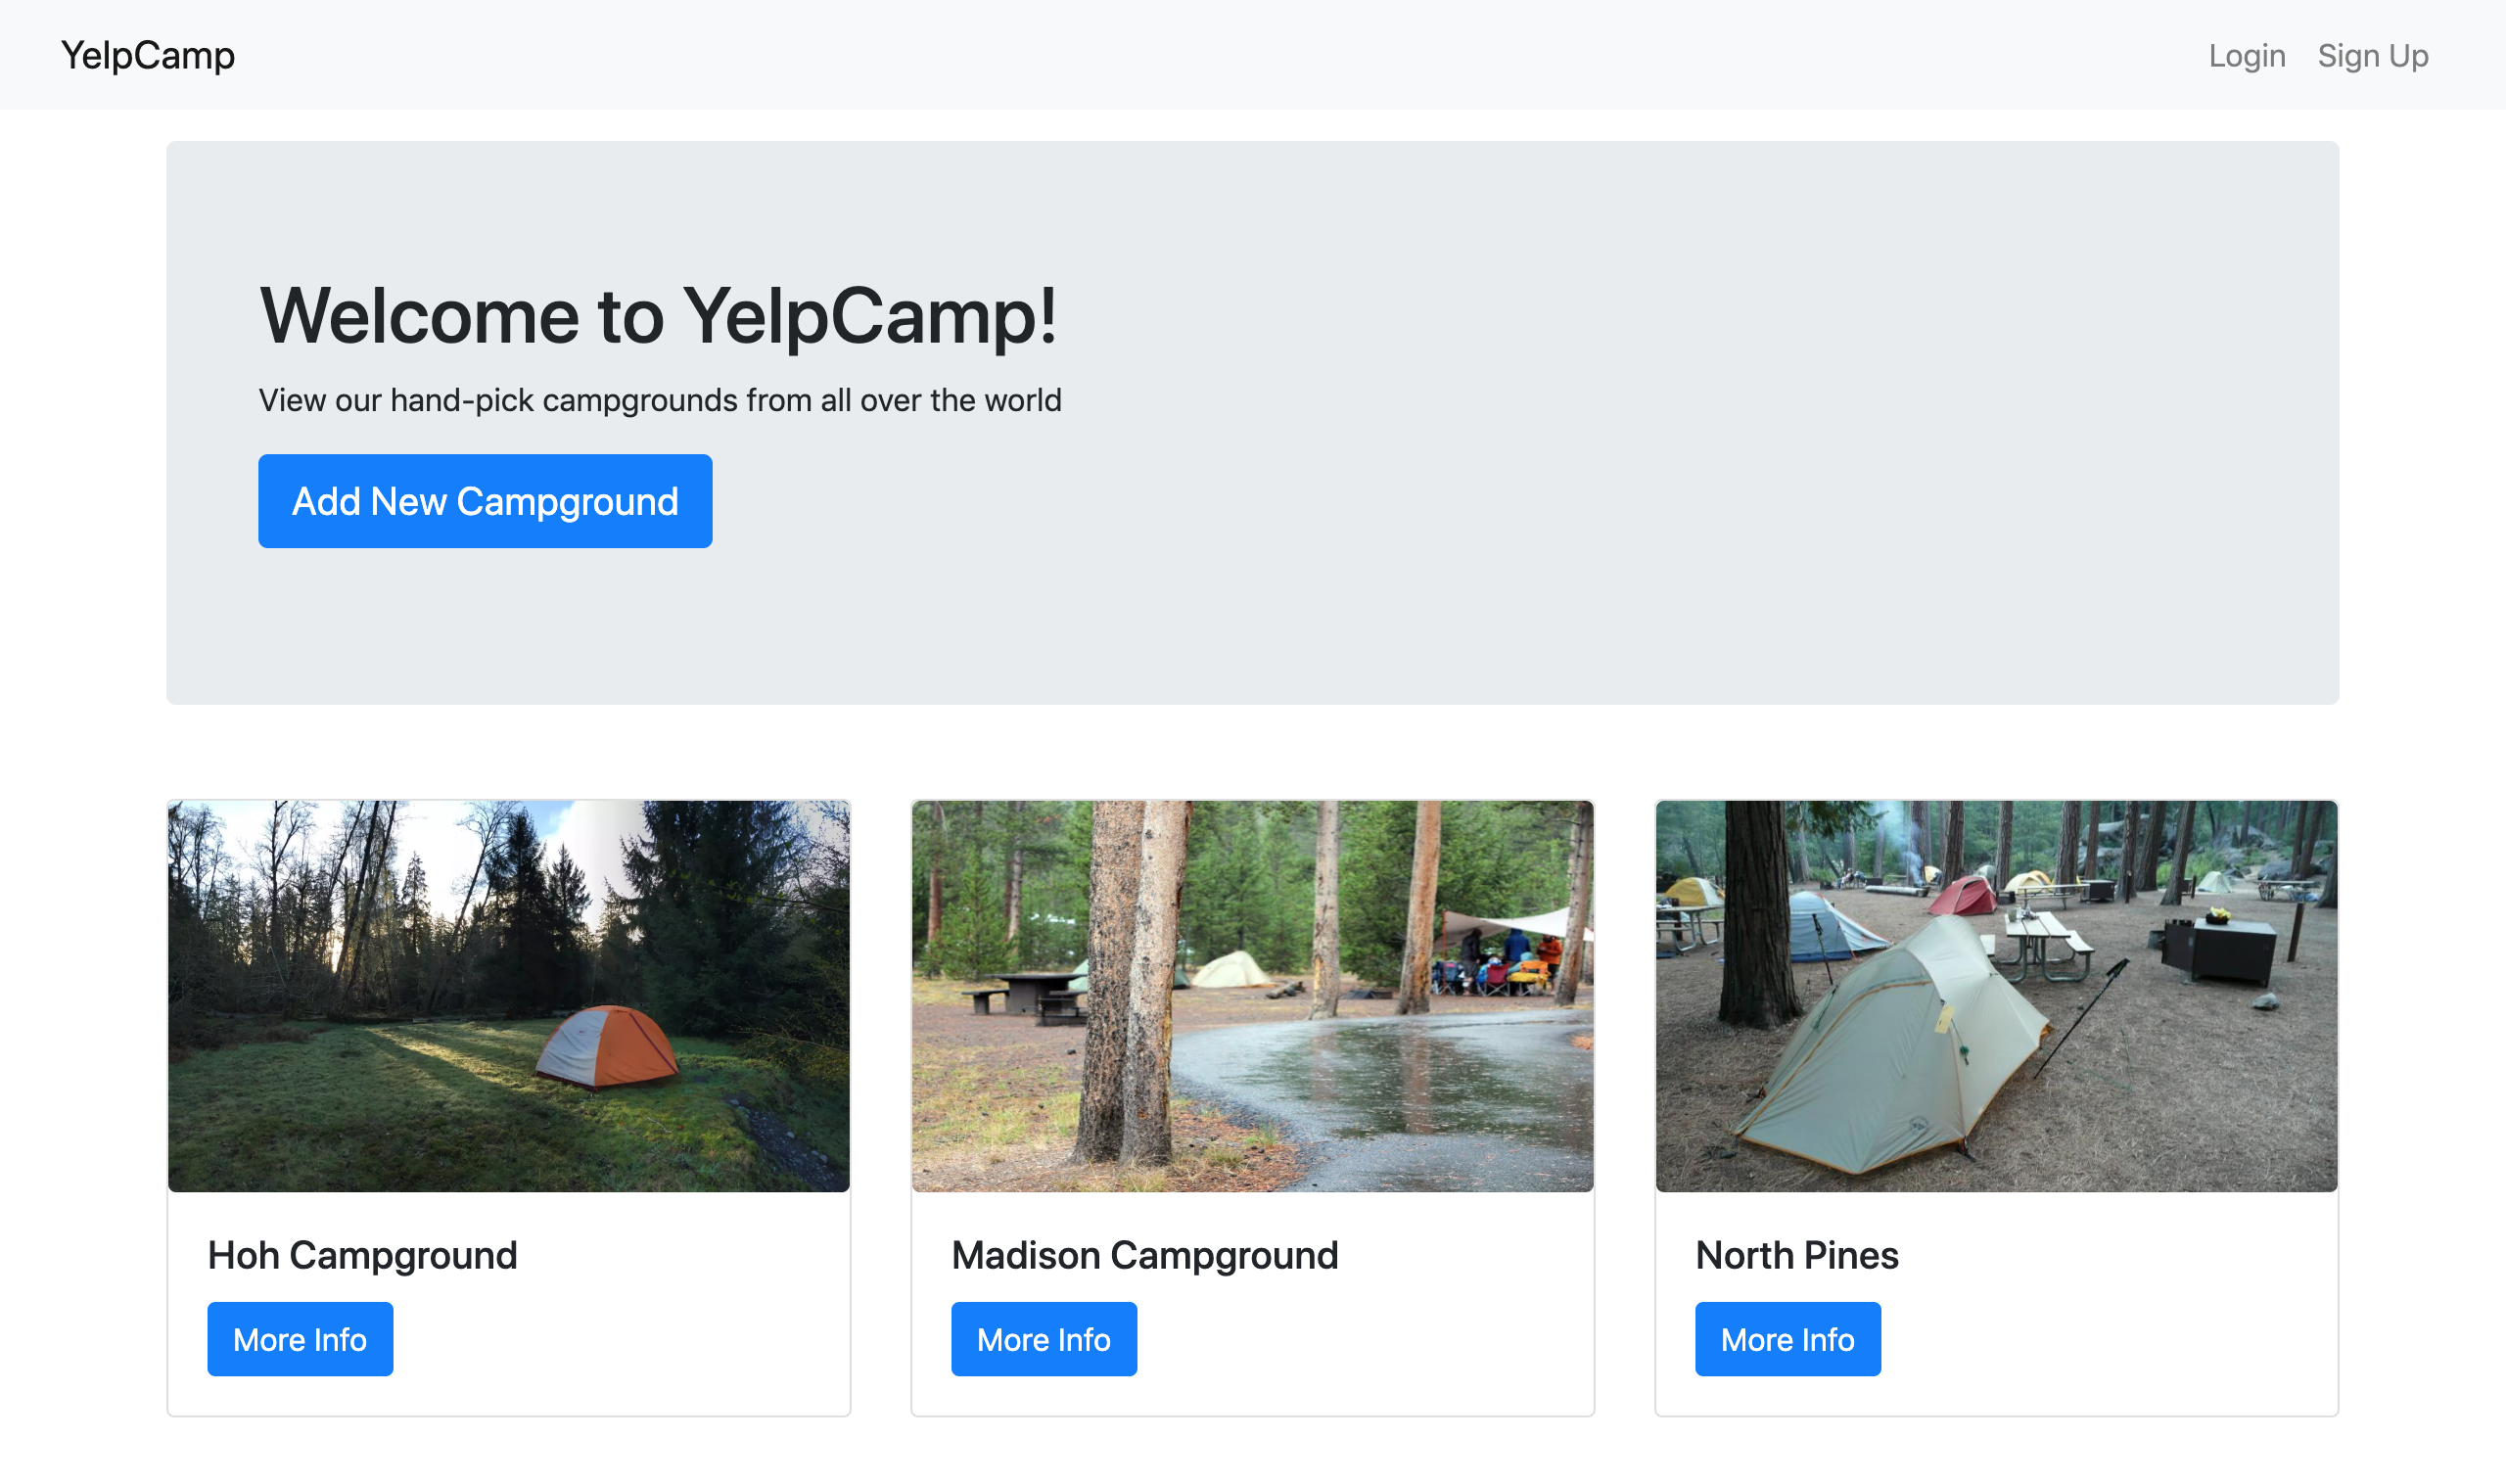 You finish 'The Web Developer Bootcamp' having built real apps, like YelpCamp